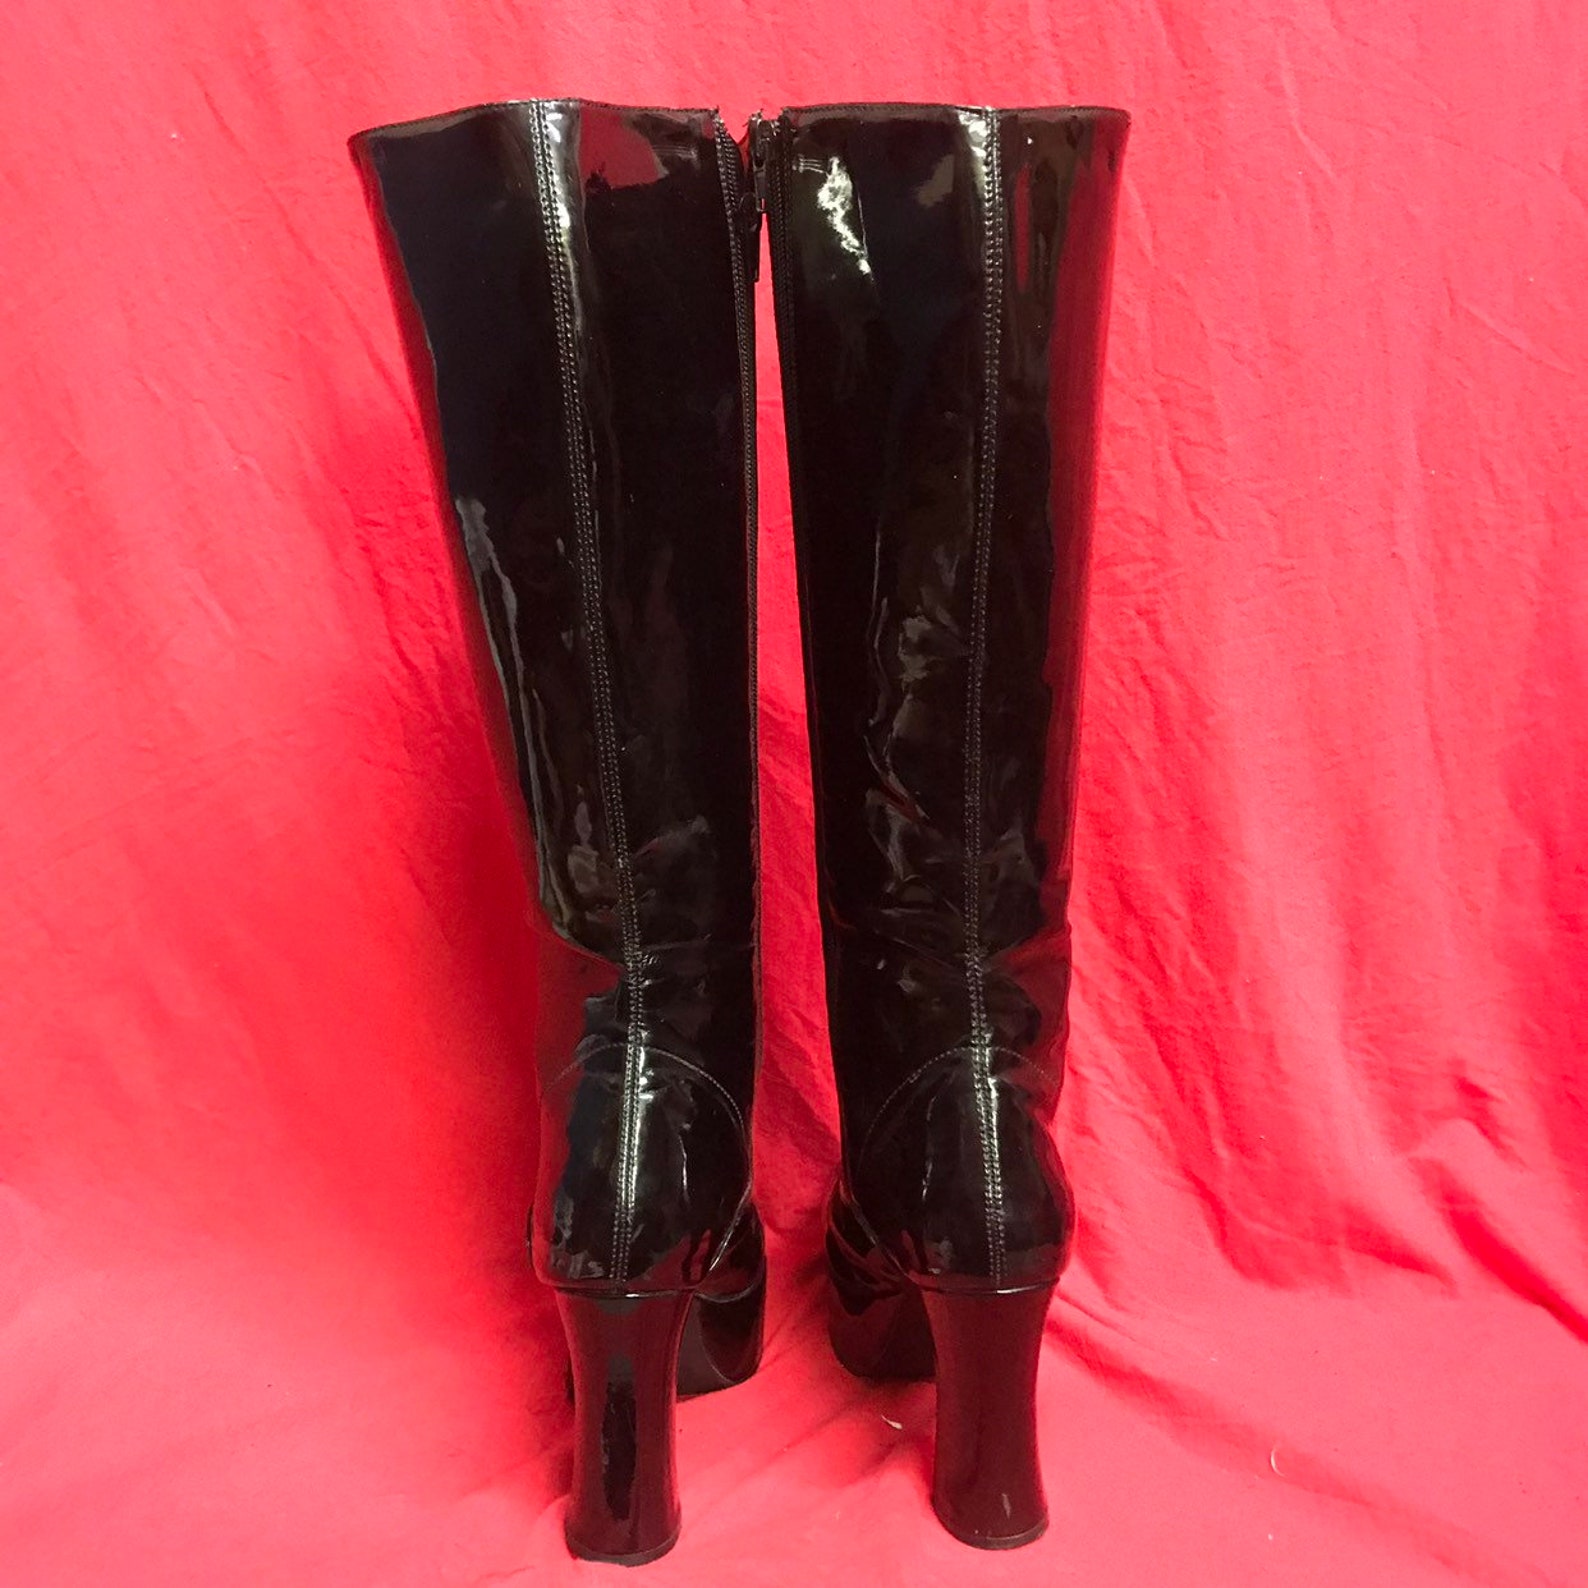 Womens 8 Knee High Shiny Patent Leather High Heel Boots Lace Etsy